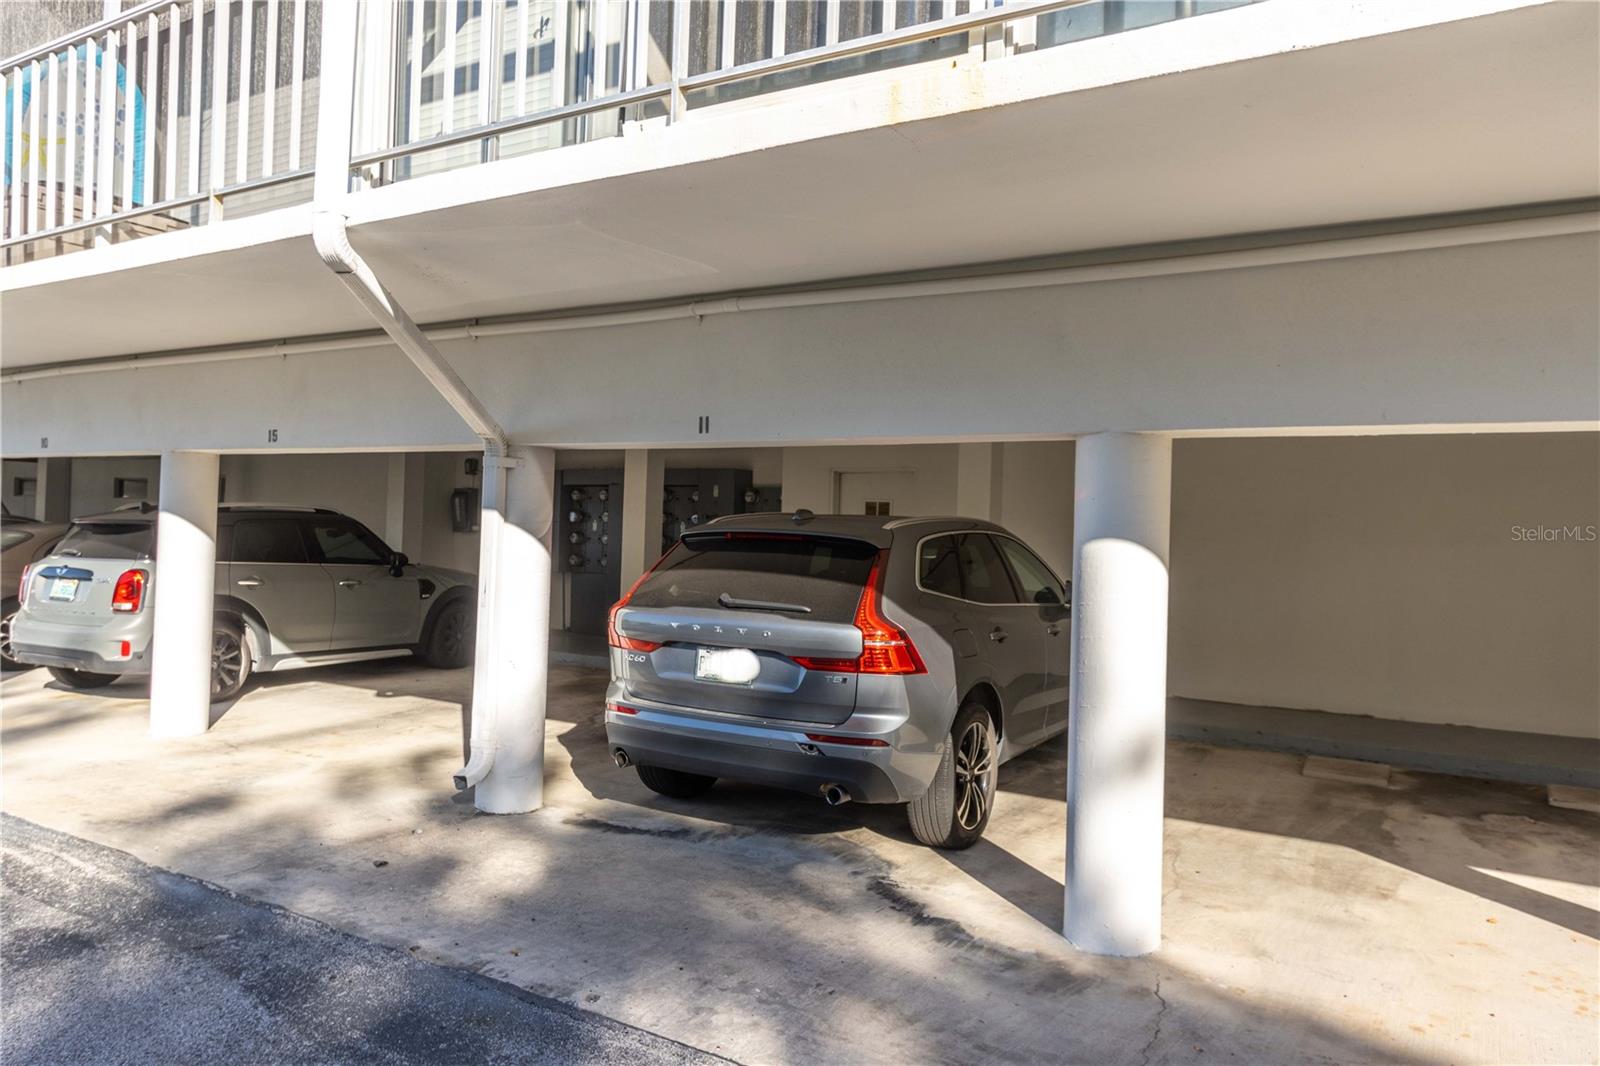 Covered Parking located right near entrance door to elevator or park at the top and walk right to your unit.